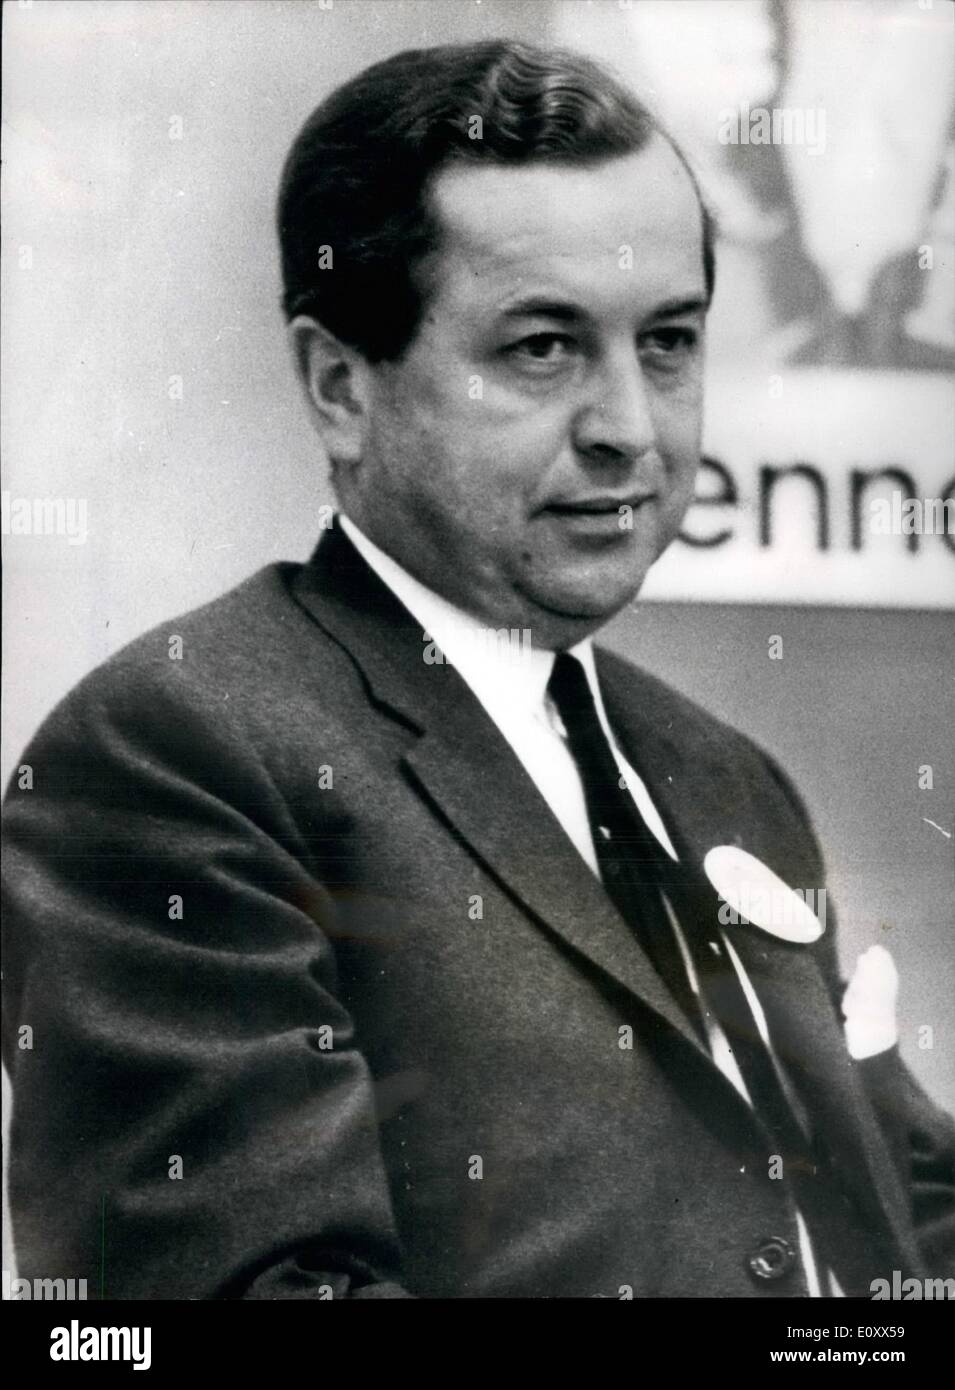 Jan. 01, 1968 - Probable new Premier of Denmark, Poul Moeller; Photo Shows Poul Moeller, the political spokesman of the Conservative Party in Denmark, who is mentioned as a probable new Danish Prime Minister, following the defeat of Jens Otto Krag in Denmark's general election on Tuesday. Stock Photo